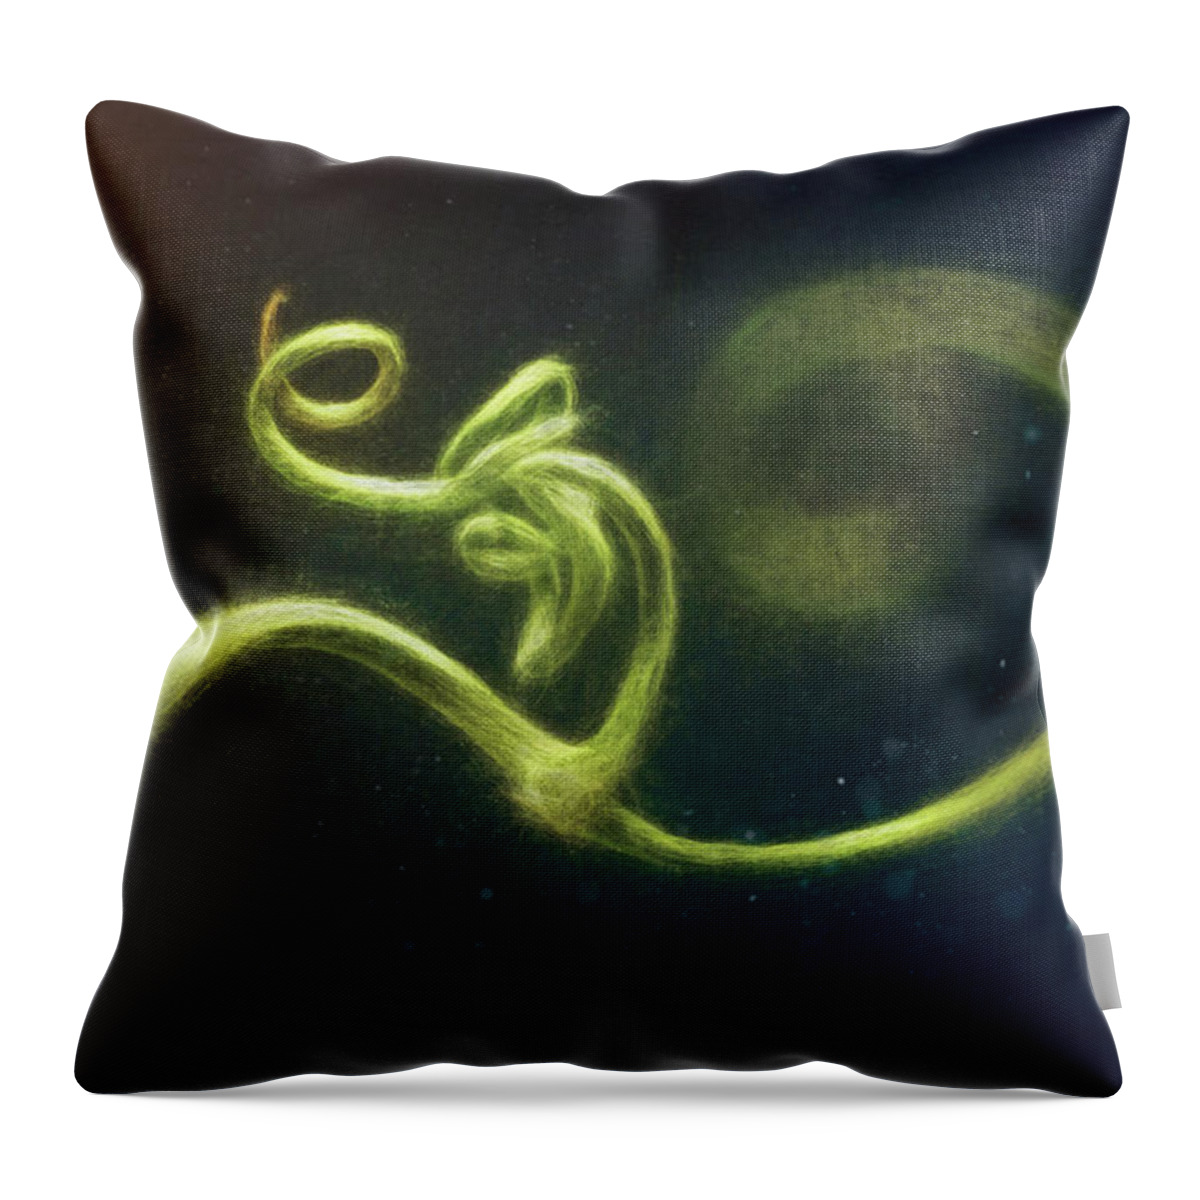 Pea Throw Pillow featuring the photograph Spiral by Scott Norris